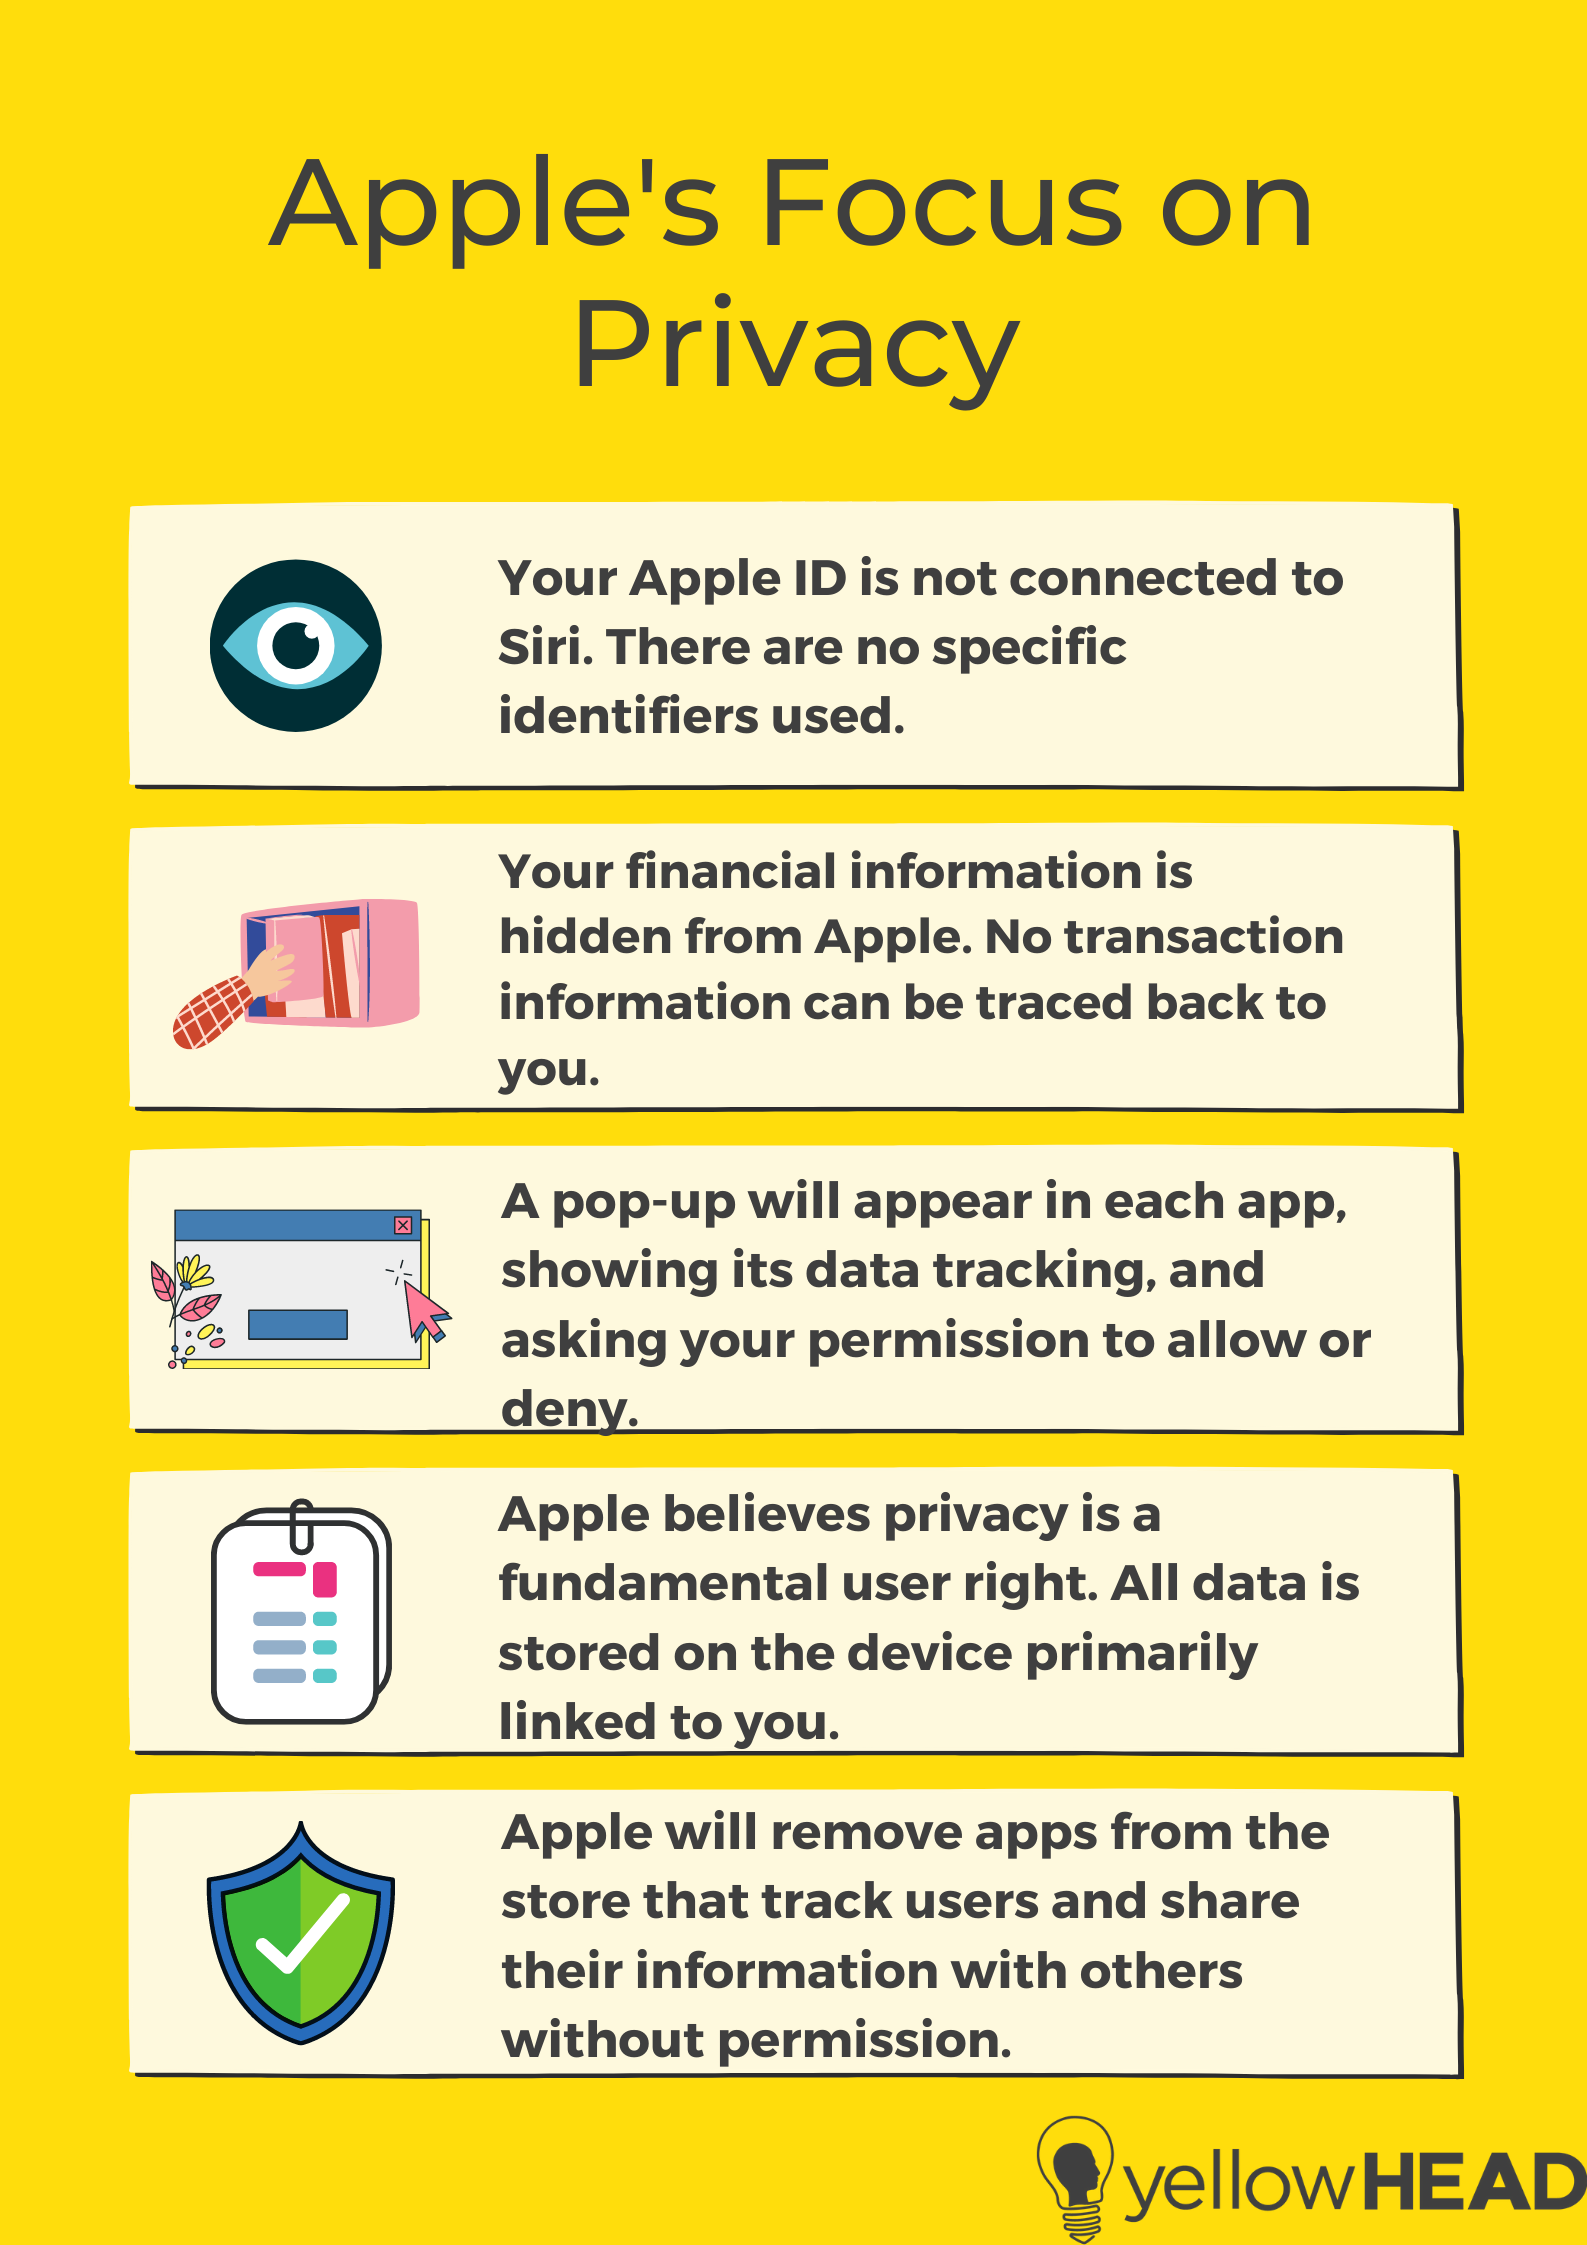 Apple's focus on privacy